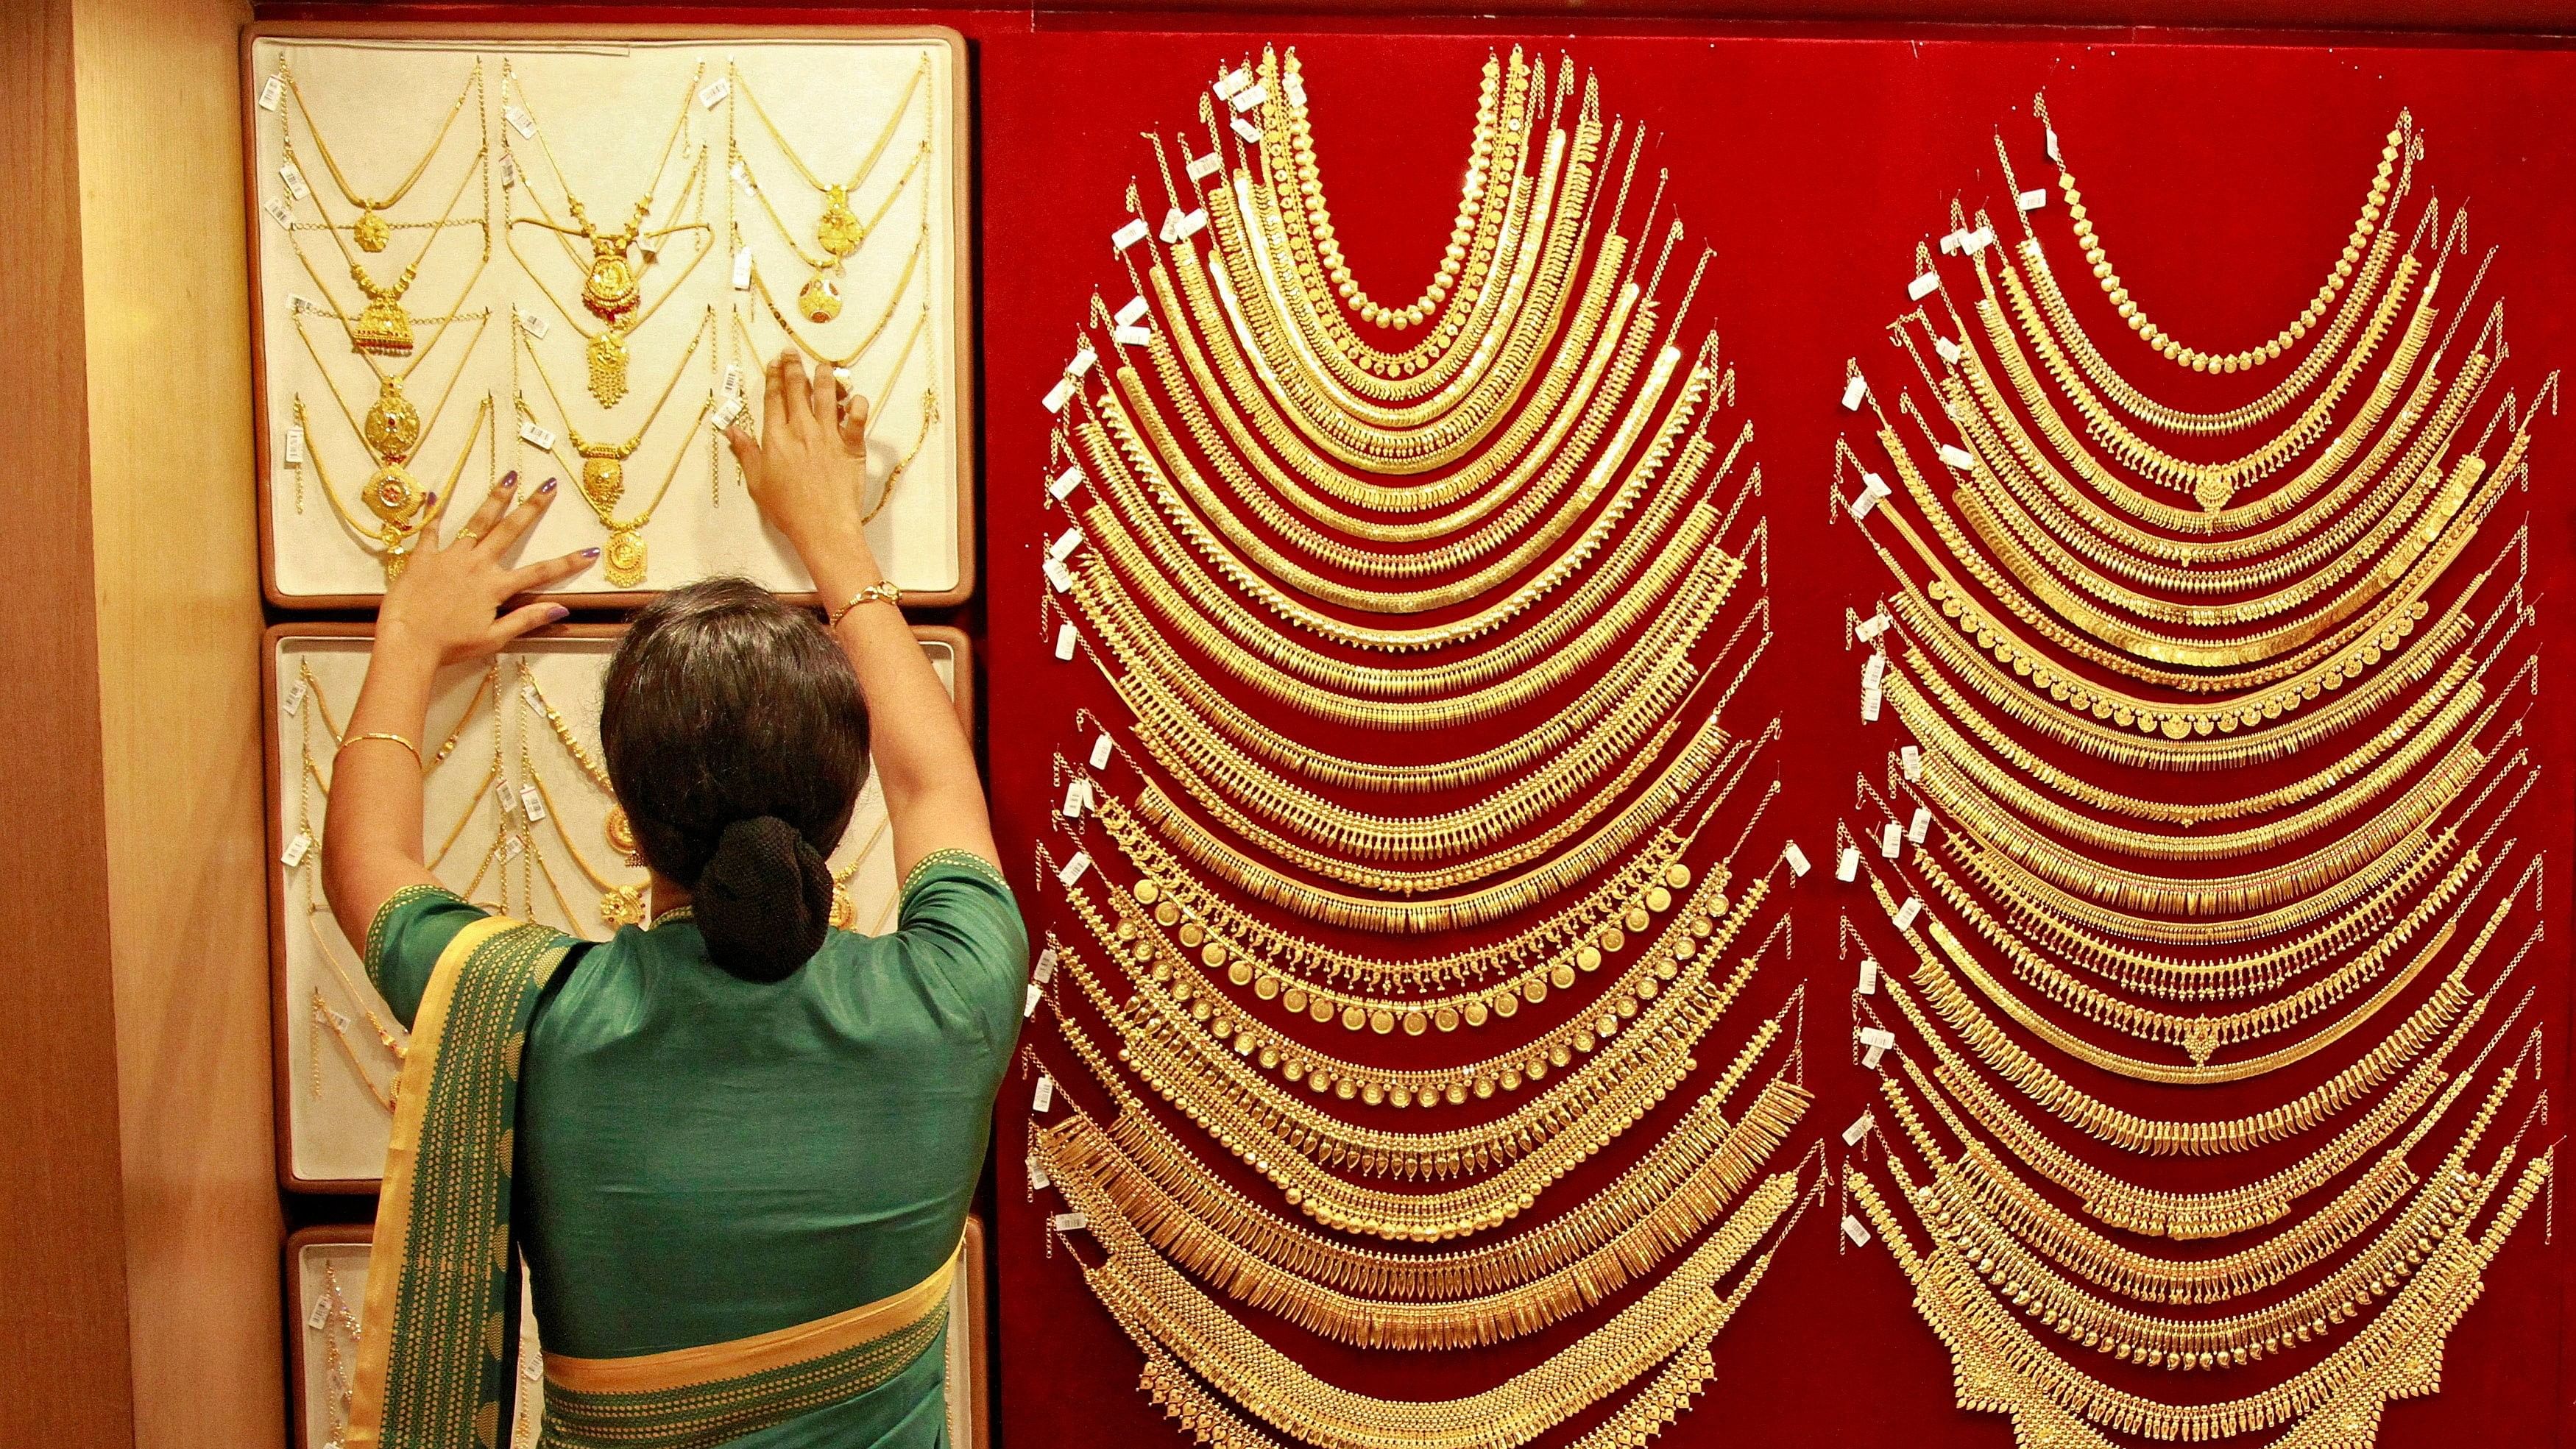 <div class="paragraphs"><p>Representative image showing a saleswoman arranging a gold necklace inside a jewellery showroom in the southern Indian city of Kochi.</p></div>